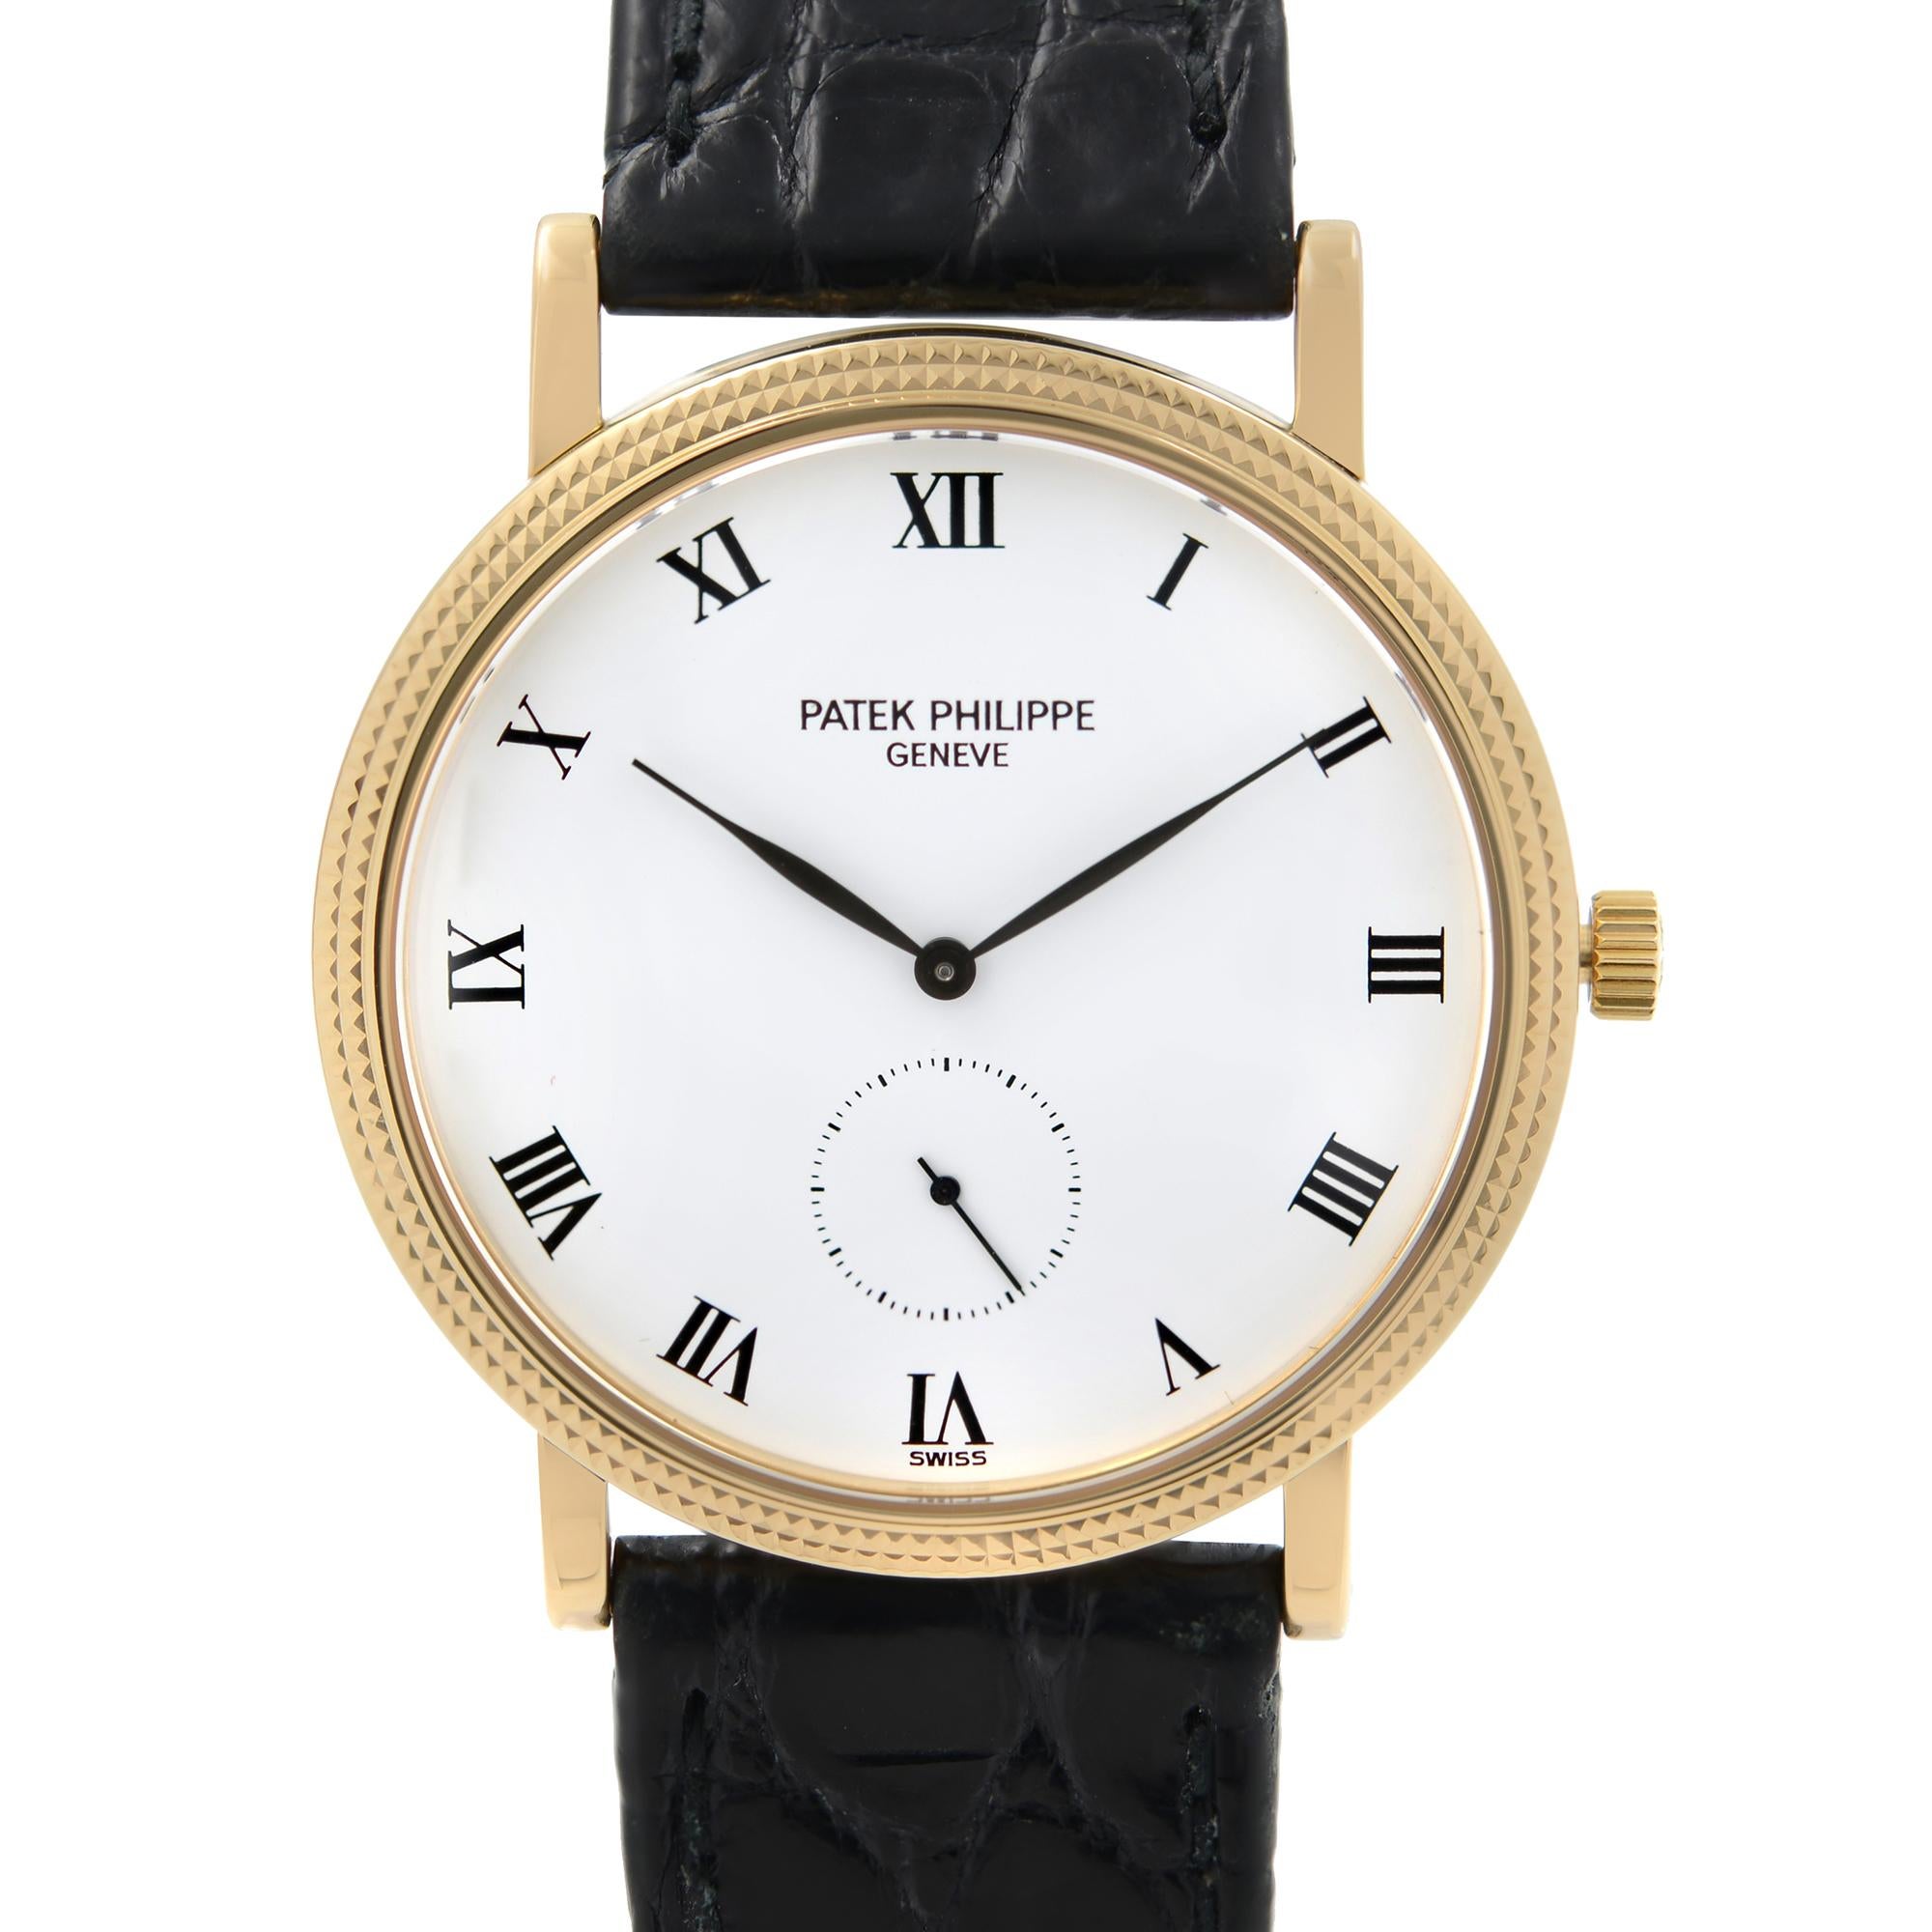 Pre-owned Model Patek Philippe Calatrava Crocodile Skin Strap White Dial Men's Watch 3919J This Beautiful Timepiece is Powered By Hand-Wind (Mechanical) Movement and Features: Gold Case with Black Crocodile Strap, Fixed Matte Carbotech Bezel, White